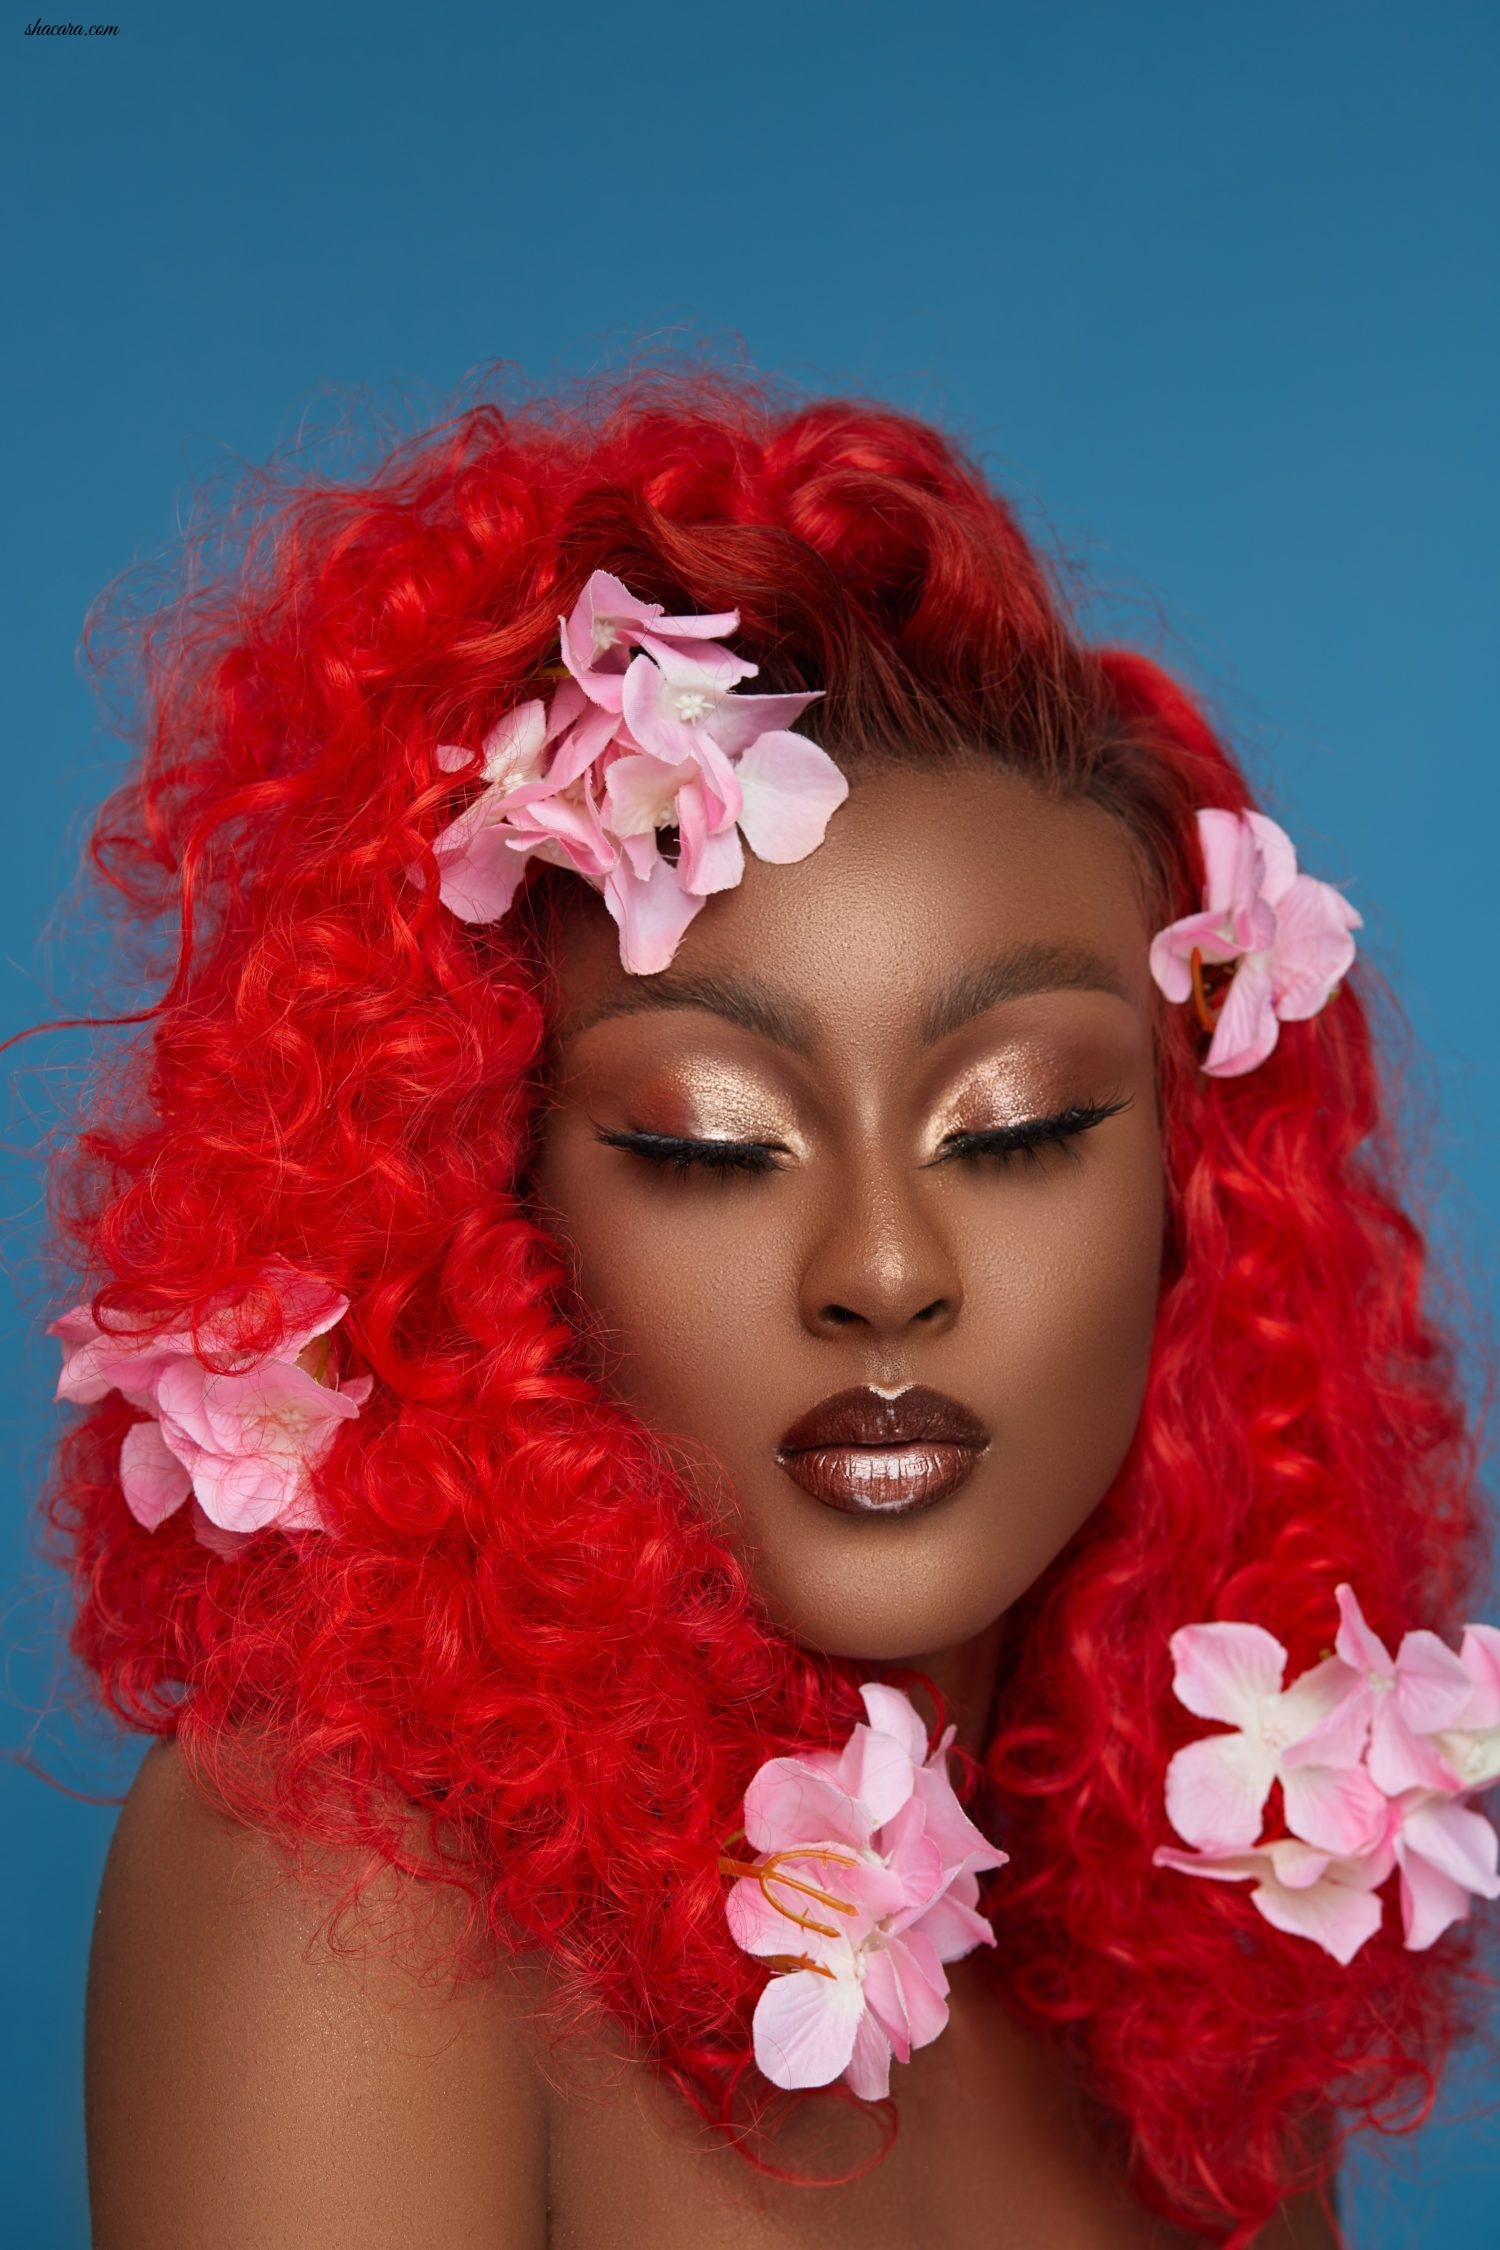 This Fairytale Beauty Editorial Will Have You Feeling Colourful